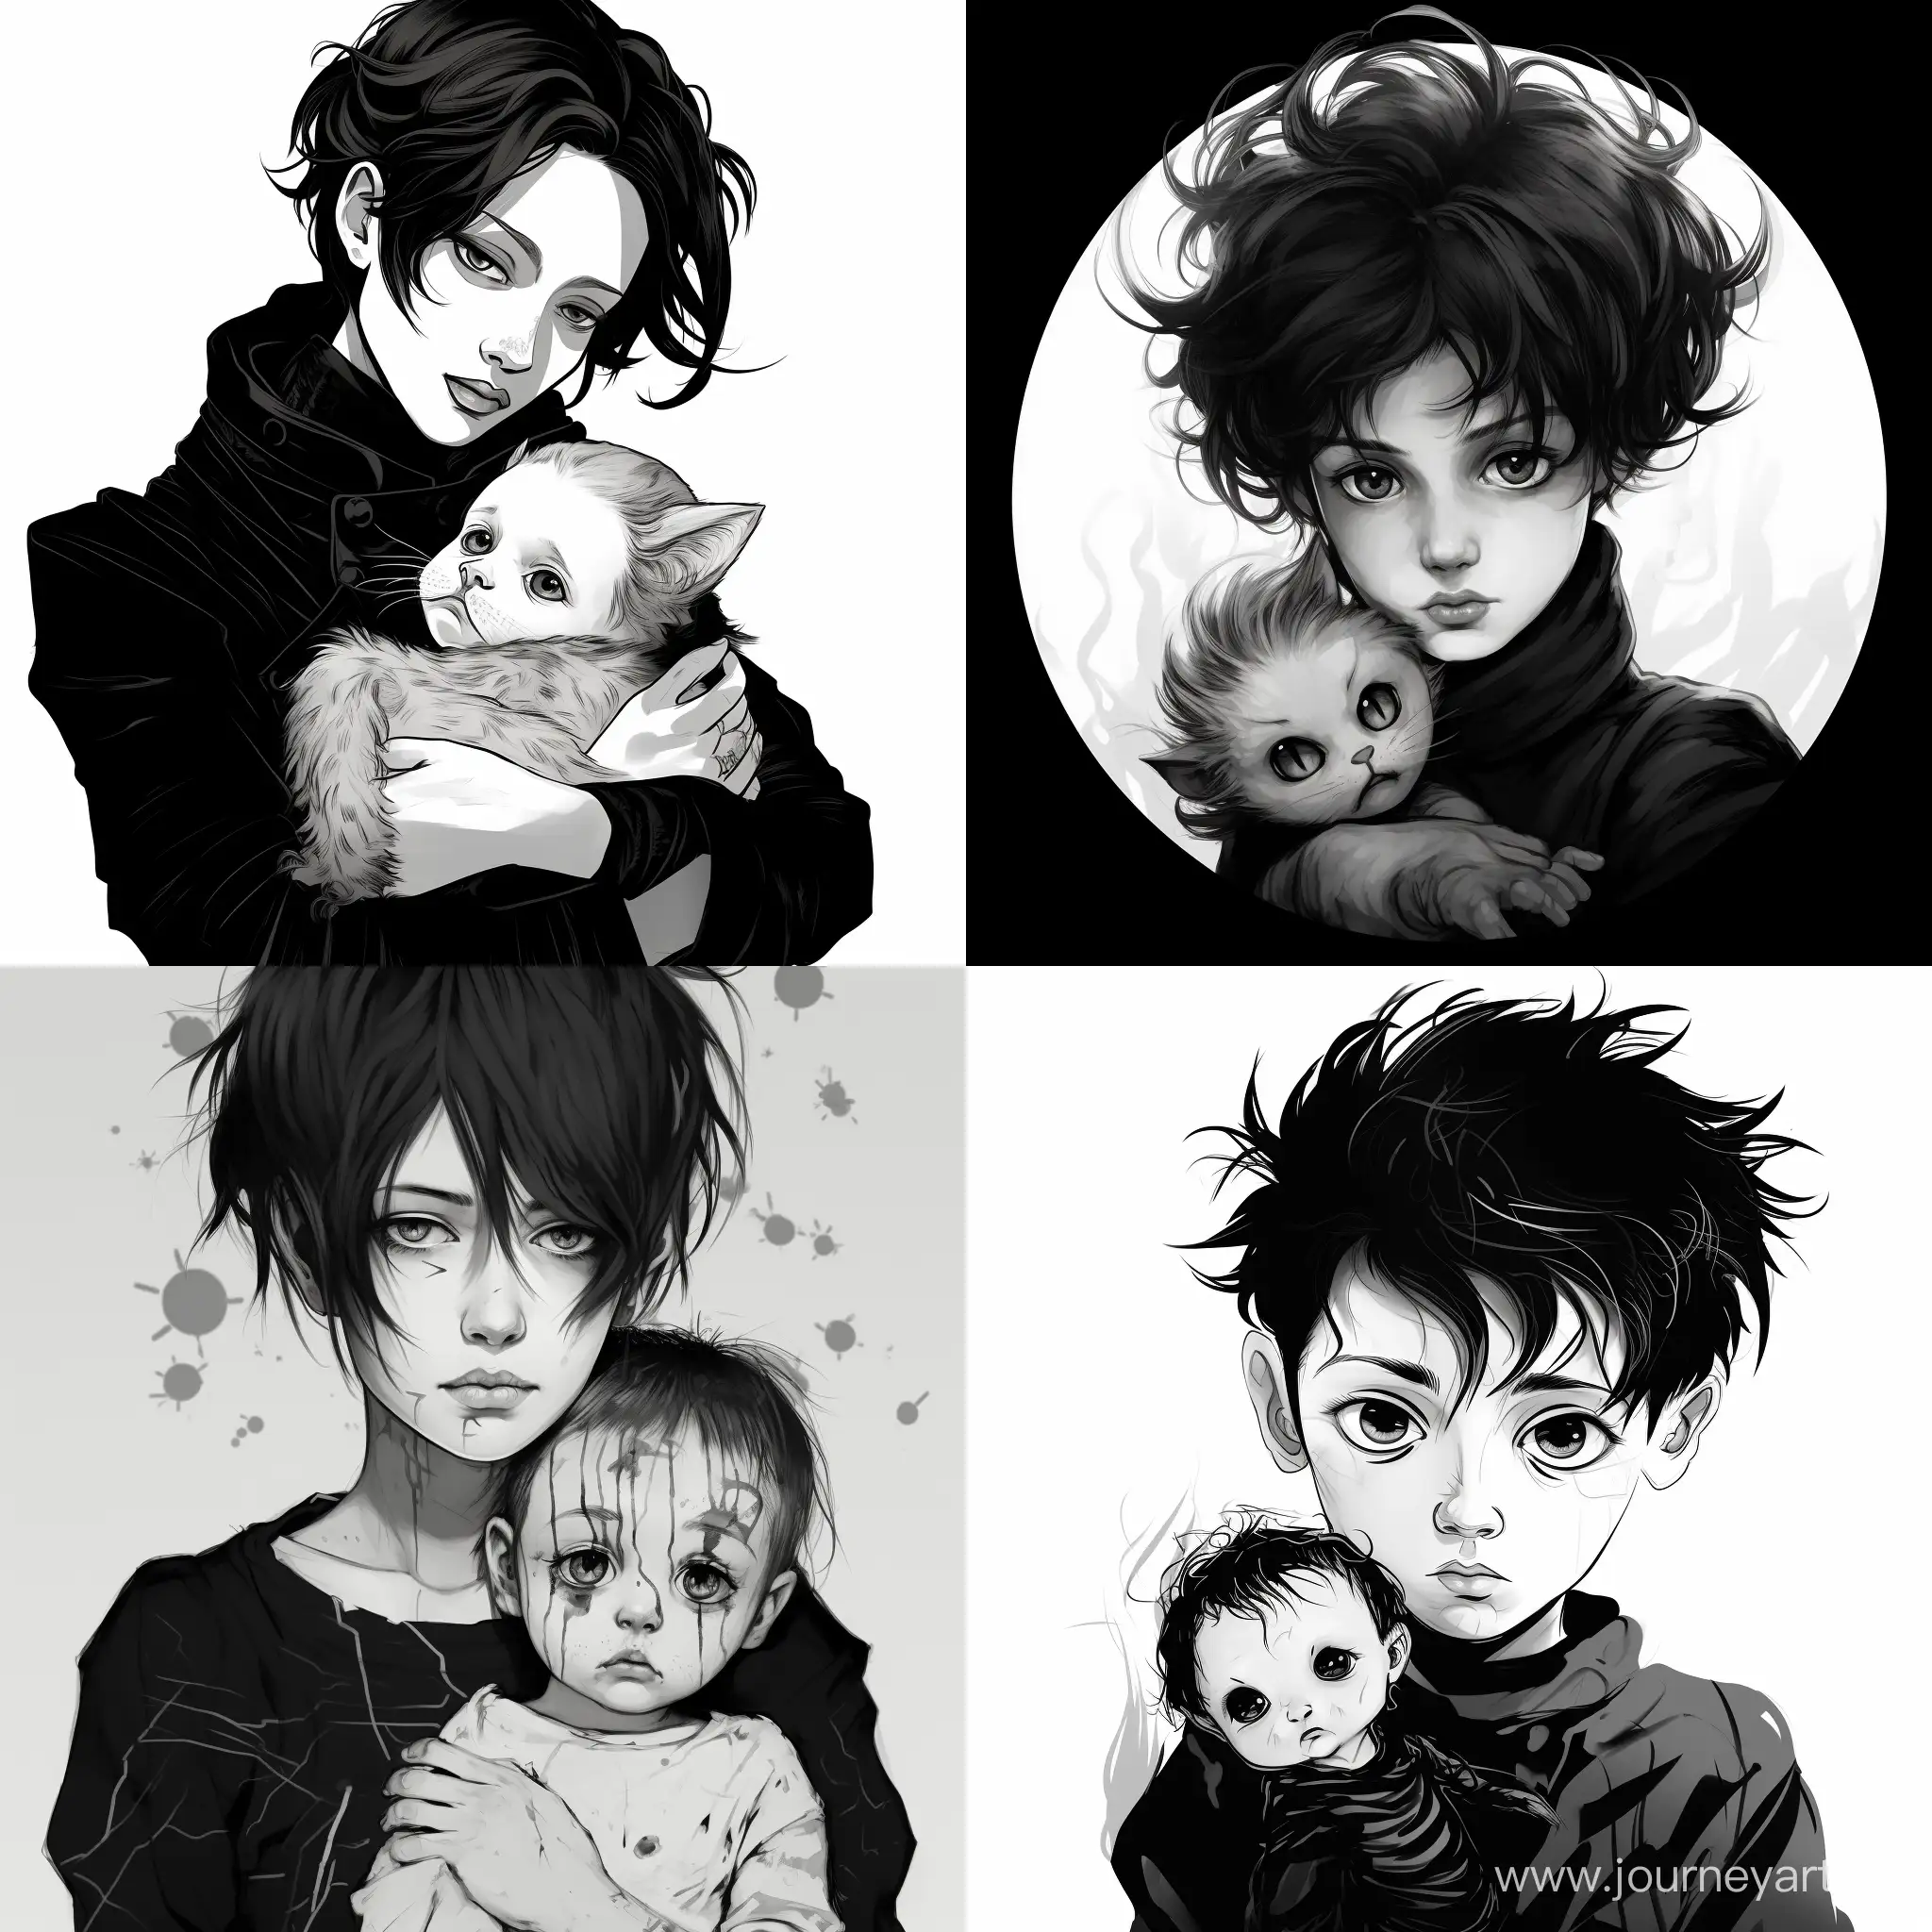 Draw an image in the style of a black and white manga on the theme of a mother holding a newborn red-eyed boy